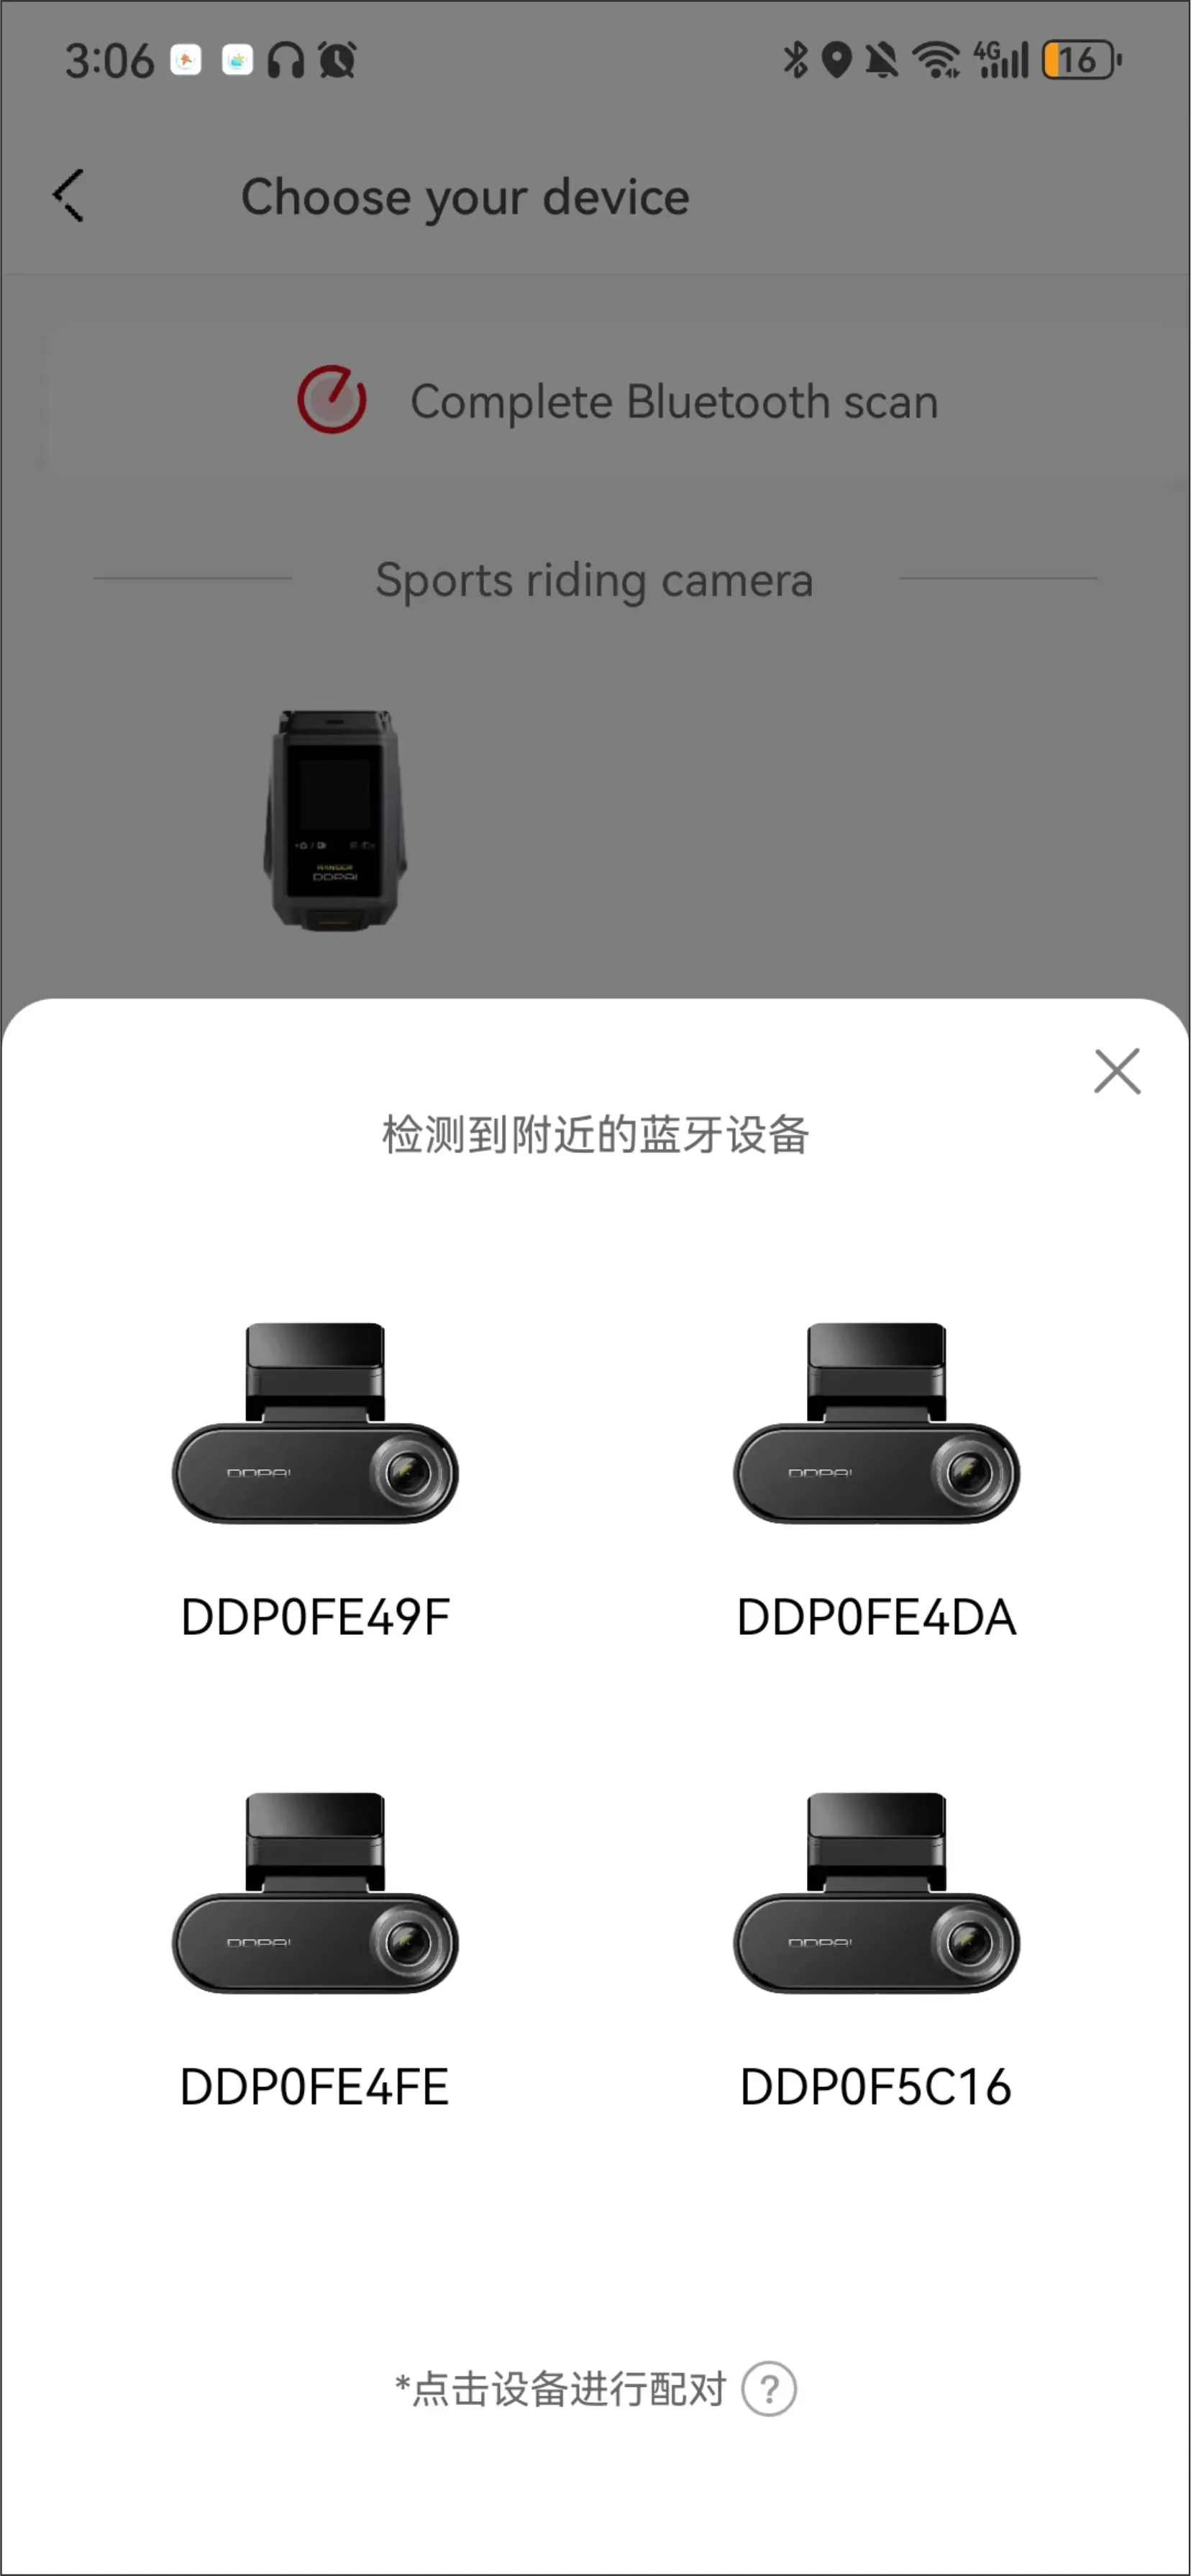 Select the current device name (DDP0FXXXX)